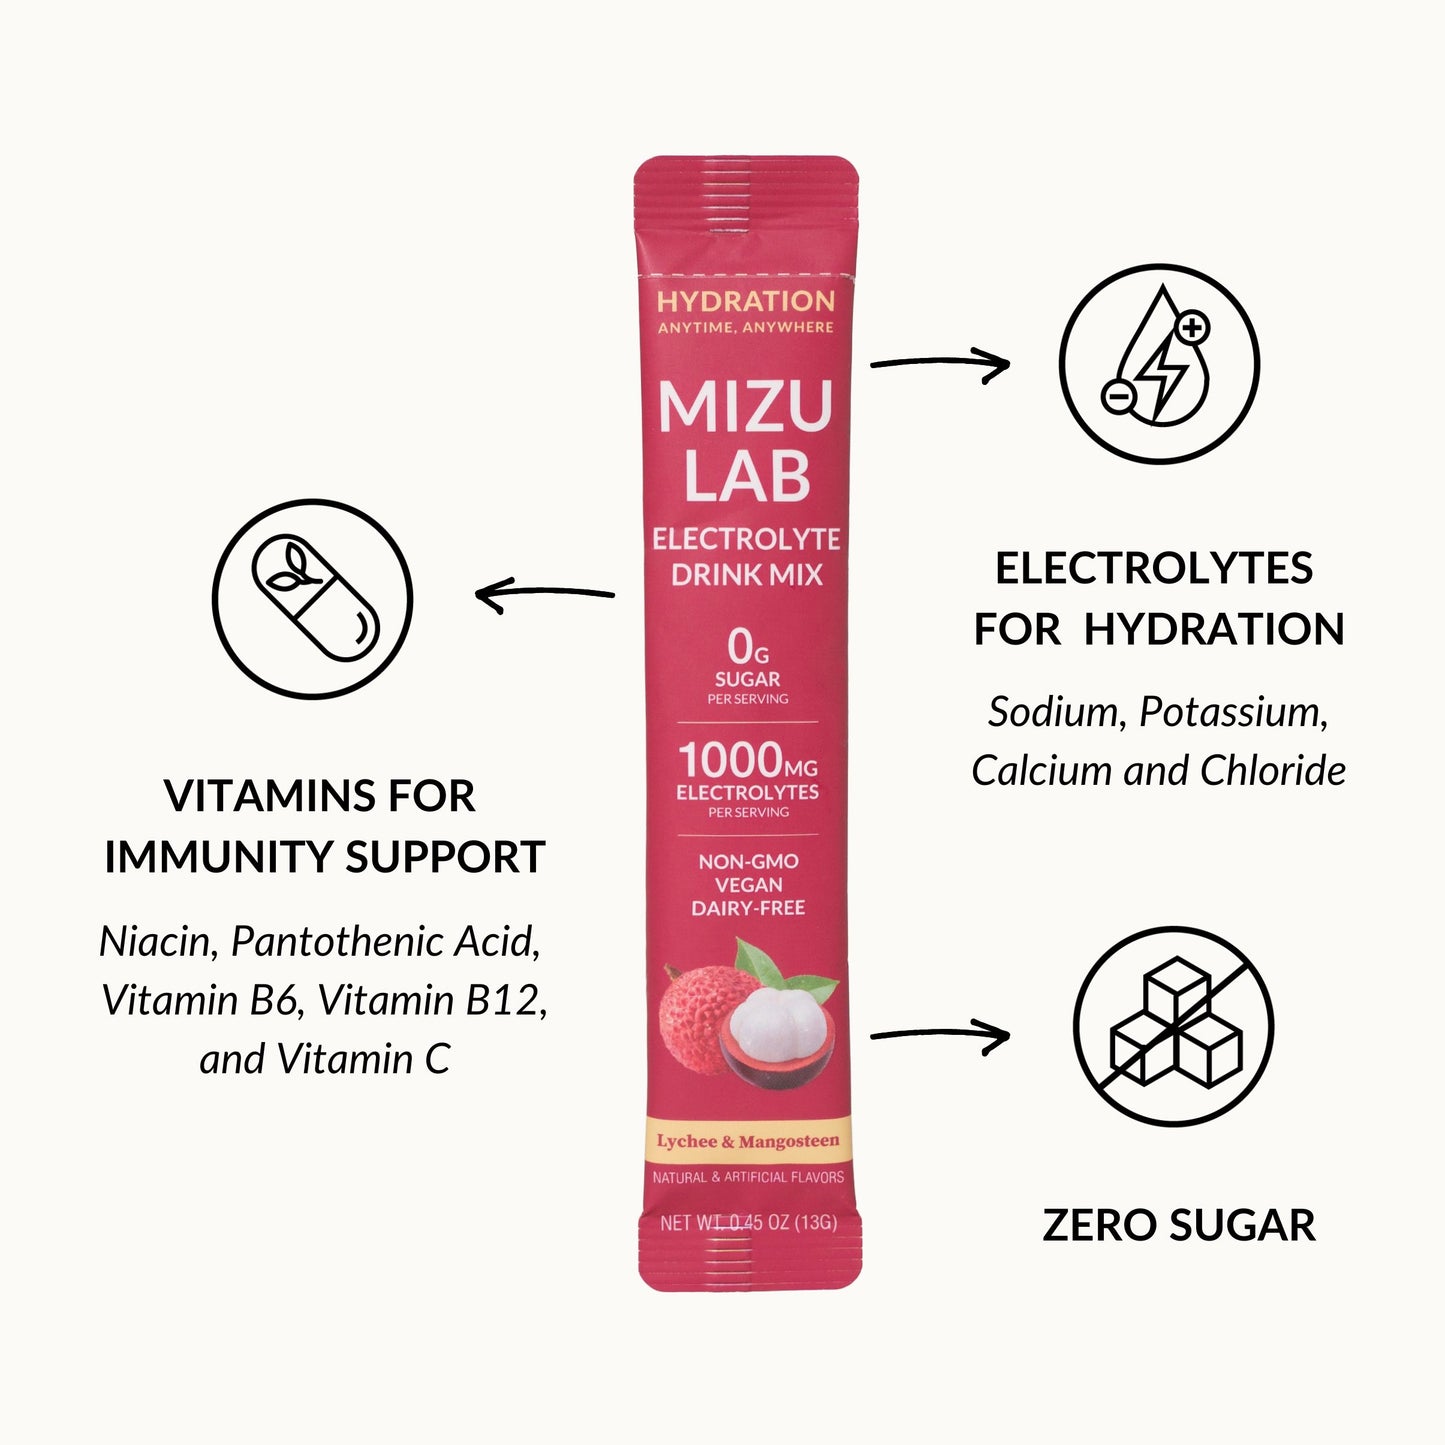 Experience hydration and immunity support with Mizu Lab's Lychee & Mangosteen electrolytes